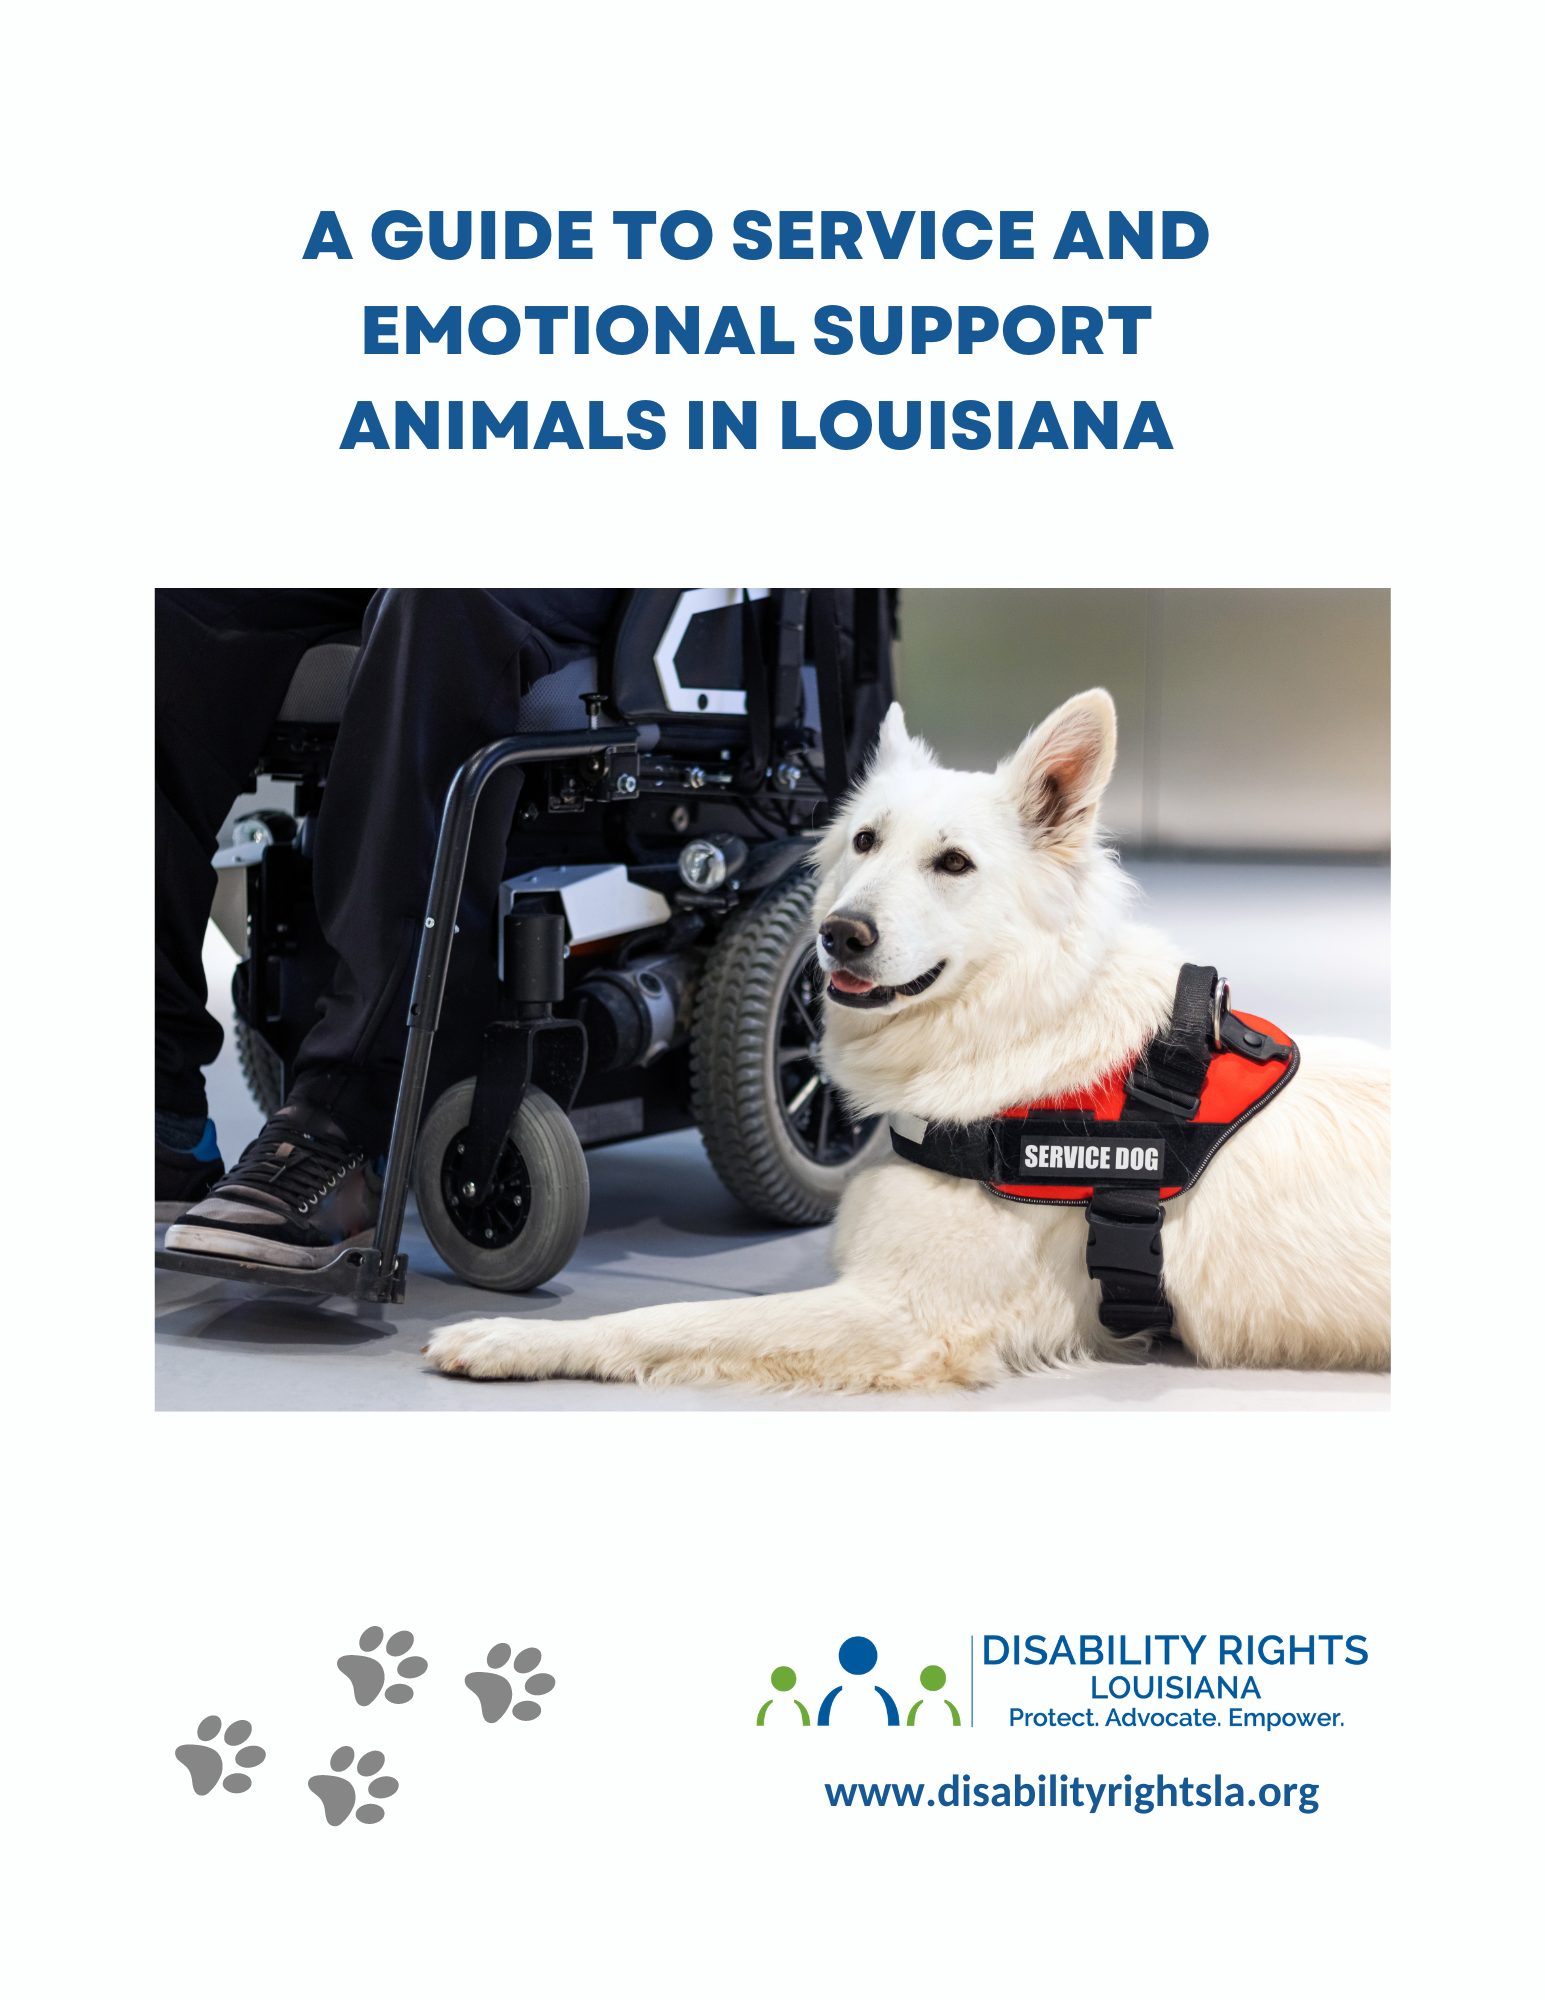 Text reads "A Guide to Service and Emotional Support Animals in Louisiana" Photo shows a white husky dog wearing. a service vest sitting by a person using a wheelchair. At bottom are paw prints and the logo for Disability Rights Louisiana, a blue figure offset by two green figures on each side next to the text "Protect, Advocate, Empower. www.disabilityrightsla.org